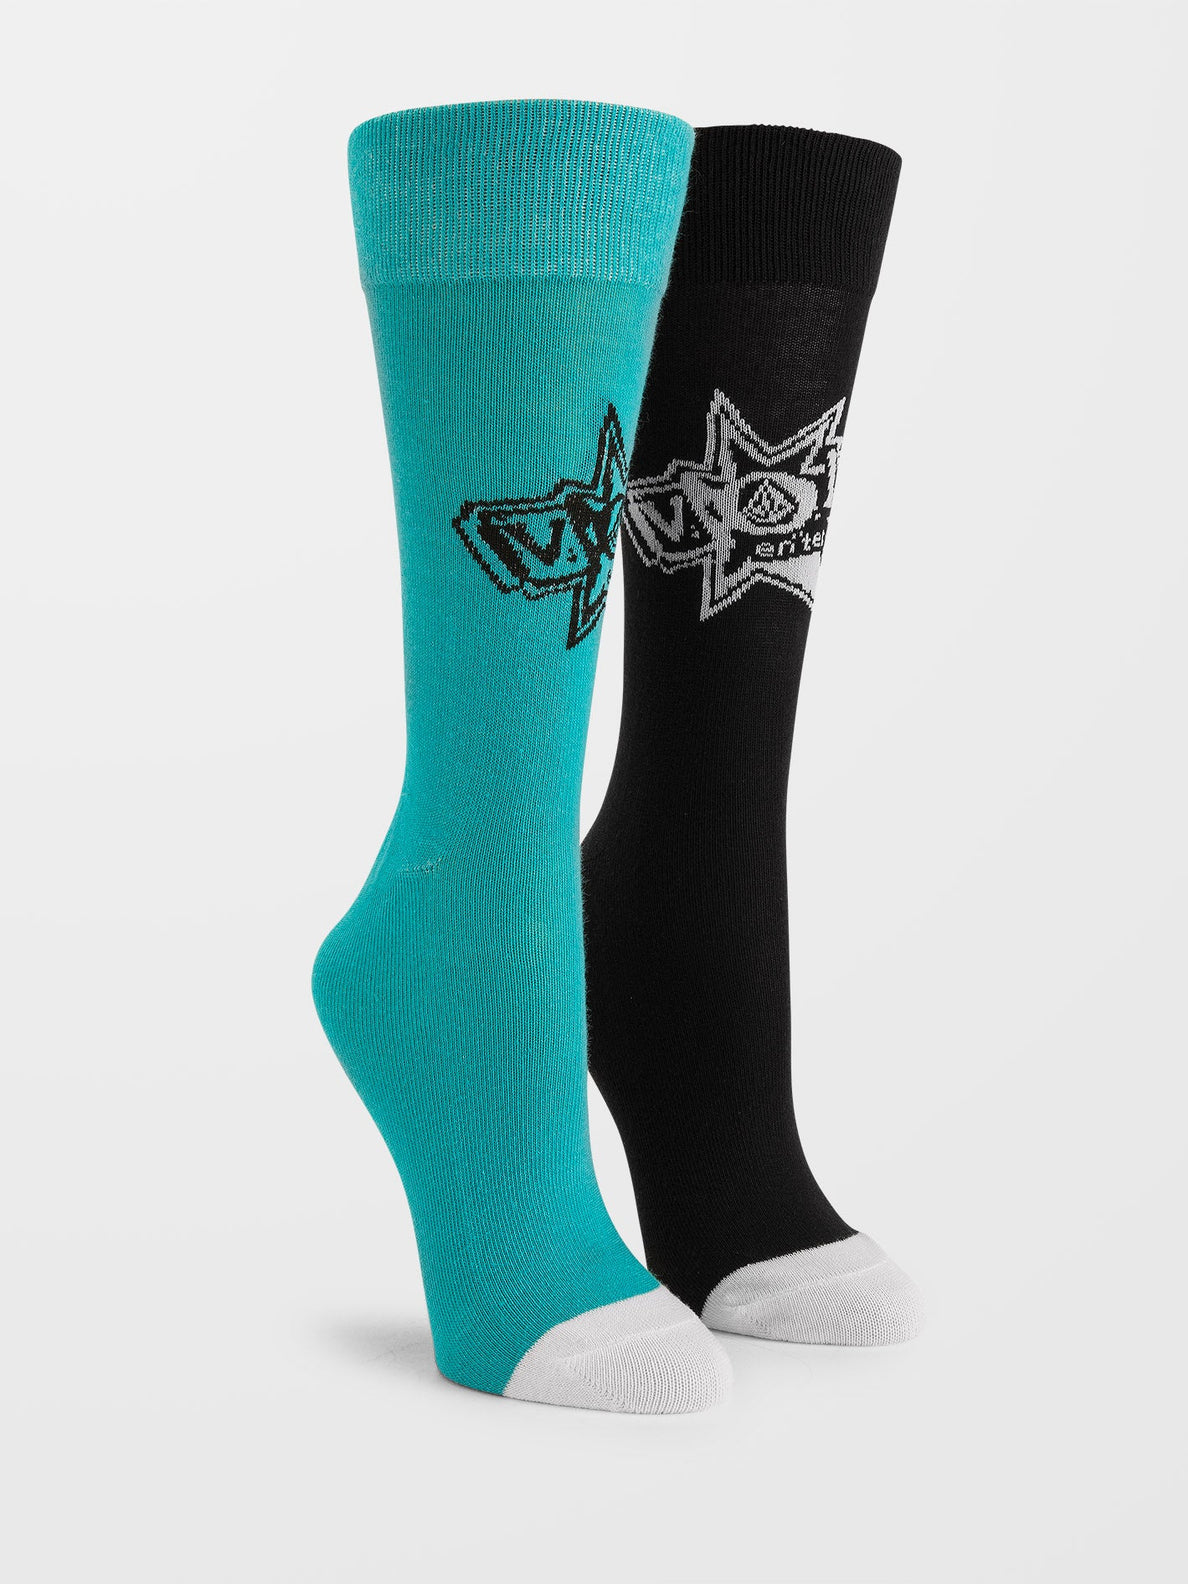 Calcetin Chica Volcom V Ent Sock - Temple Teal